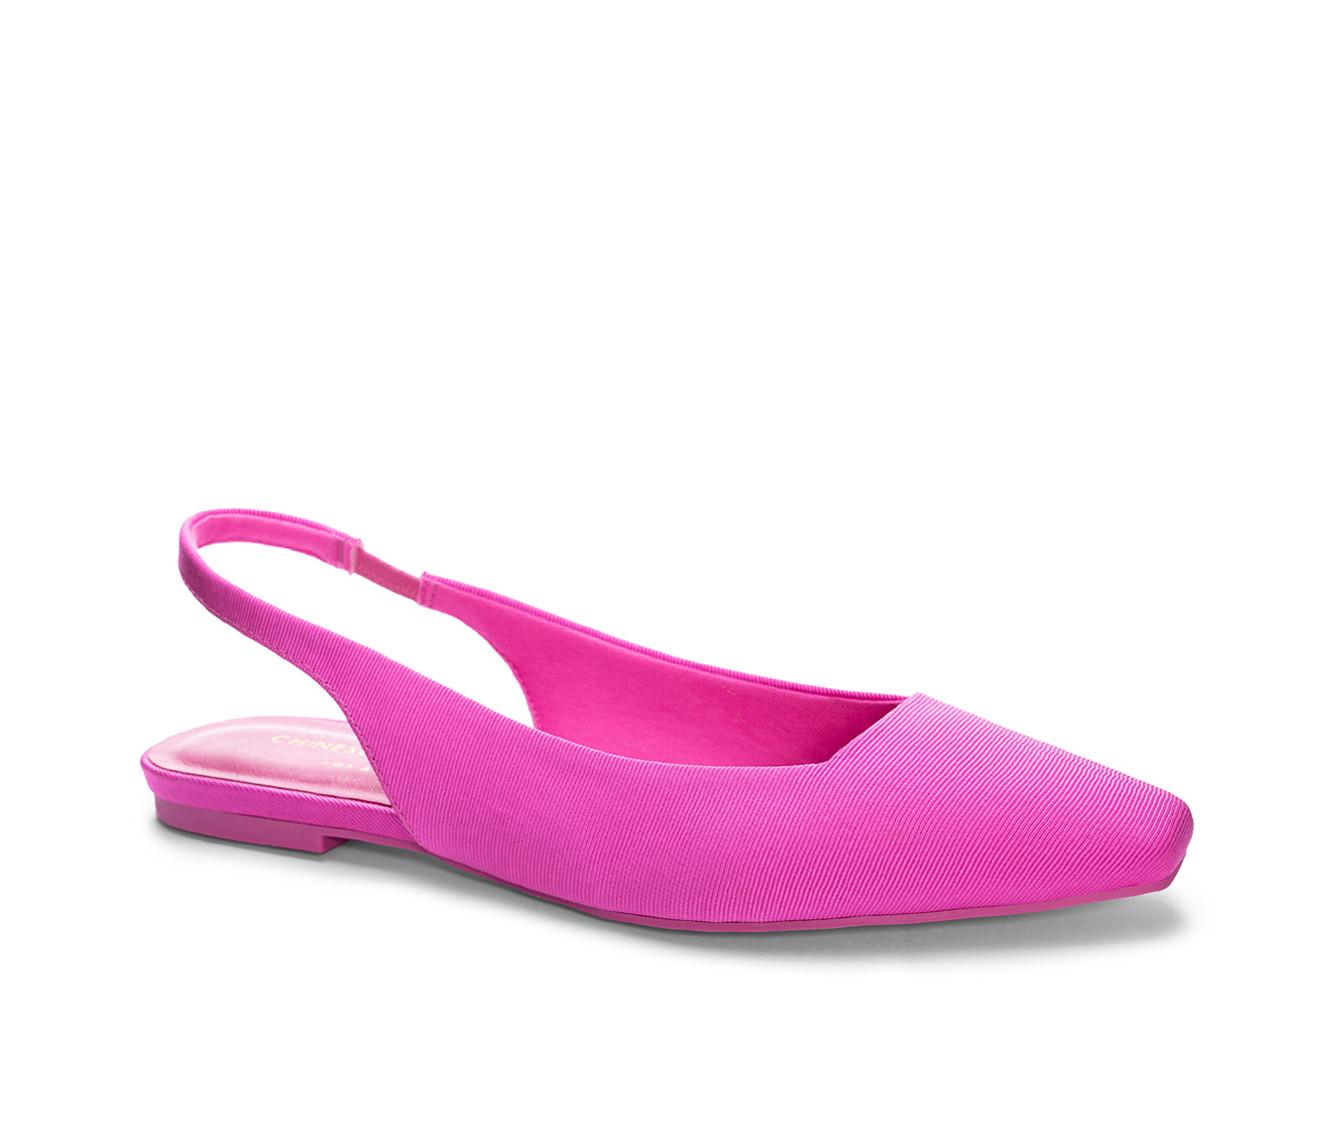 Women's Chinese Laundry Rhyme Time Slingback Flats